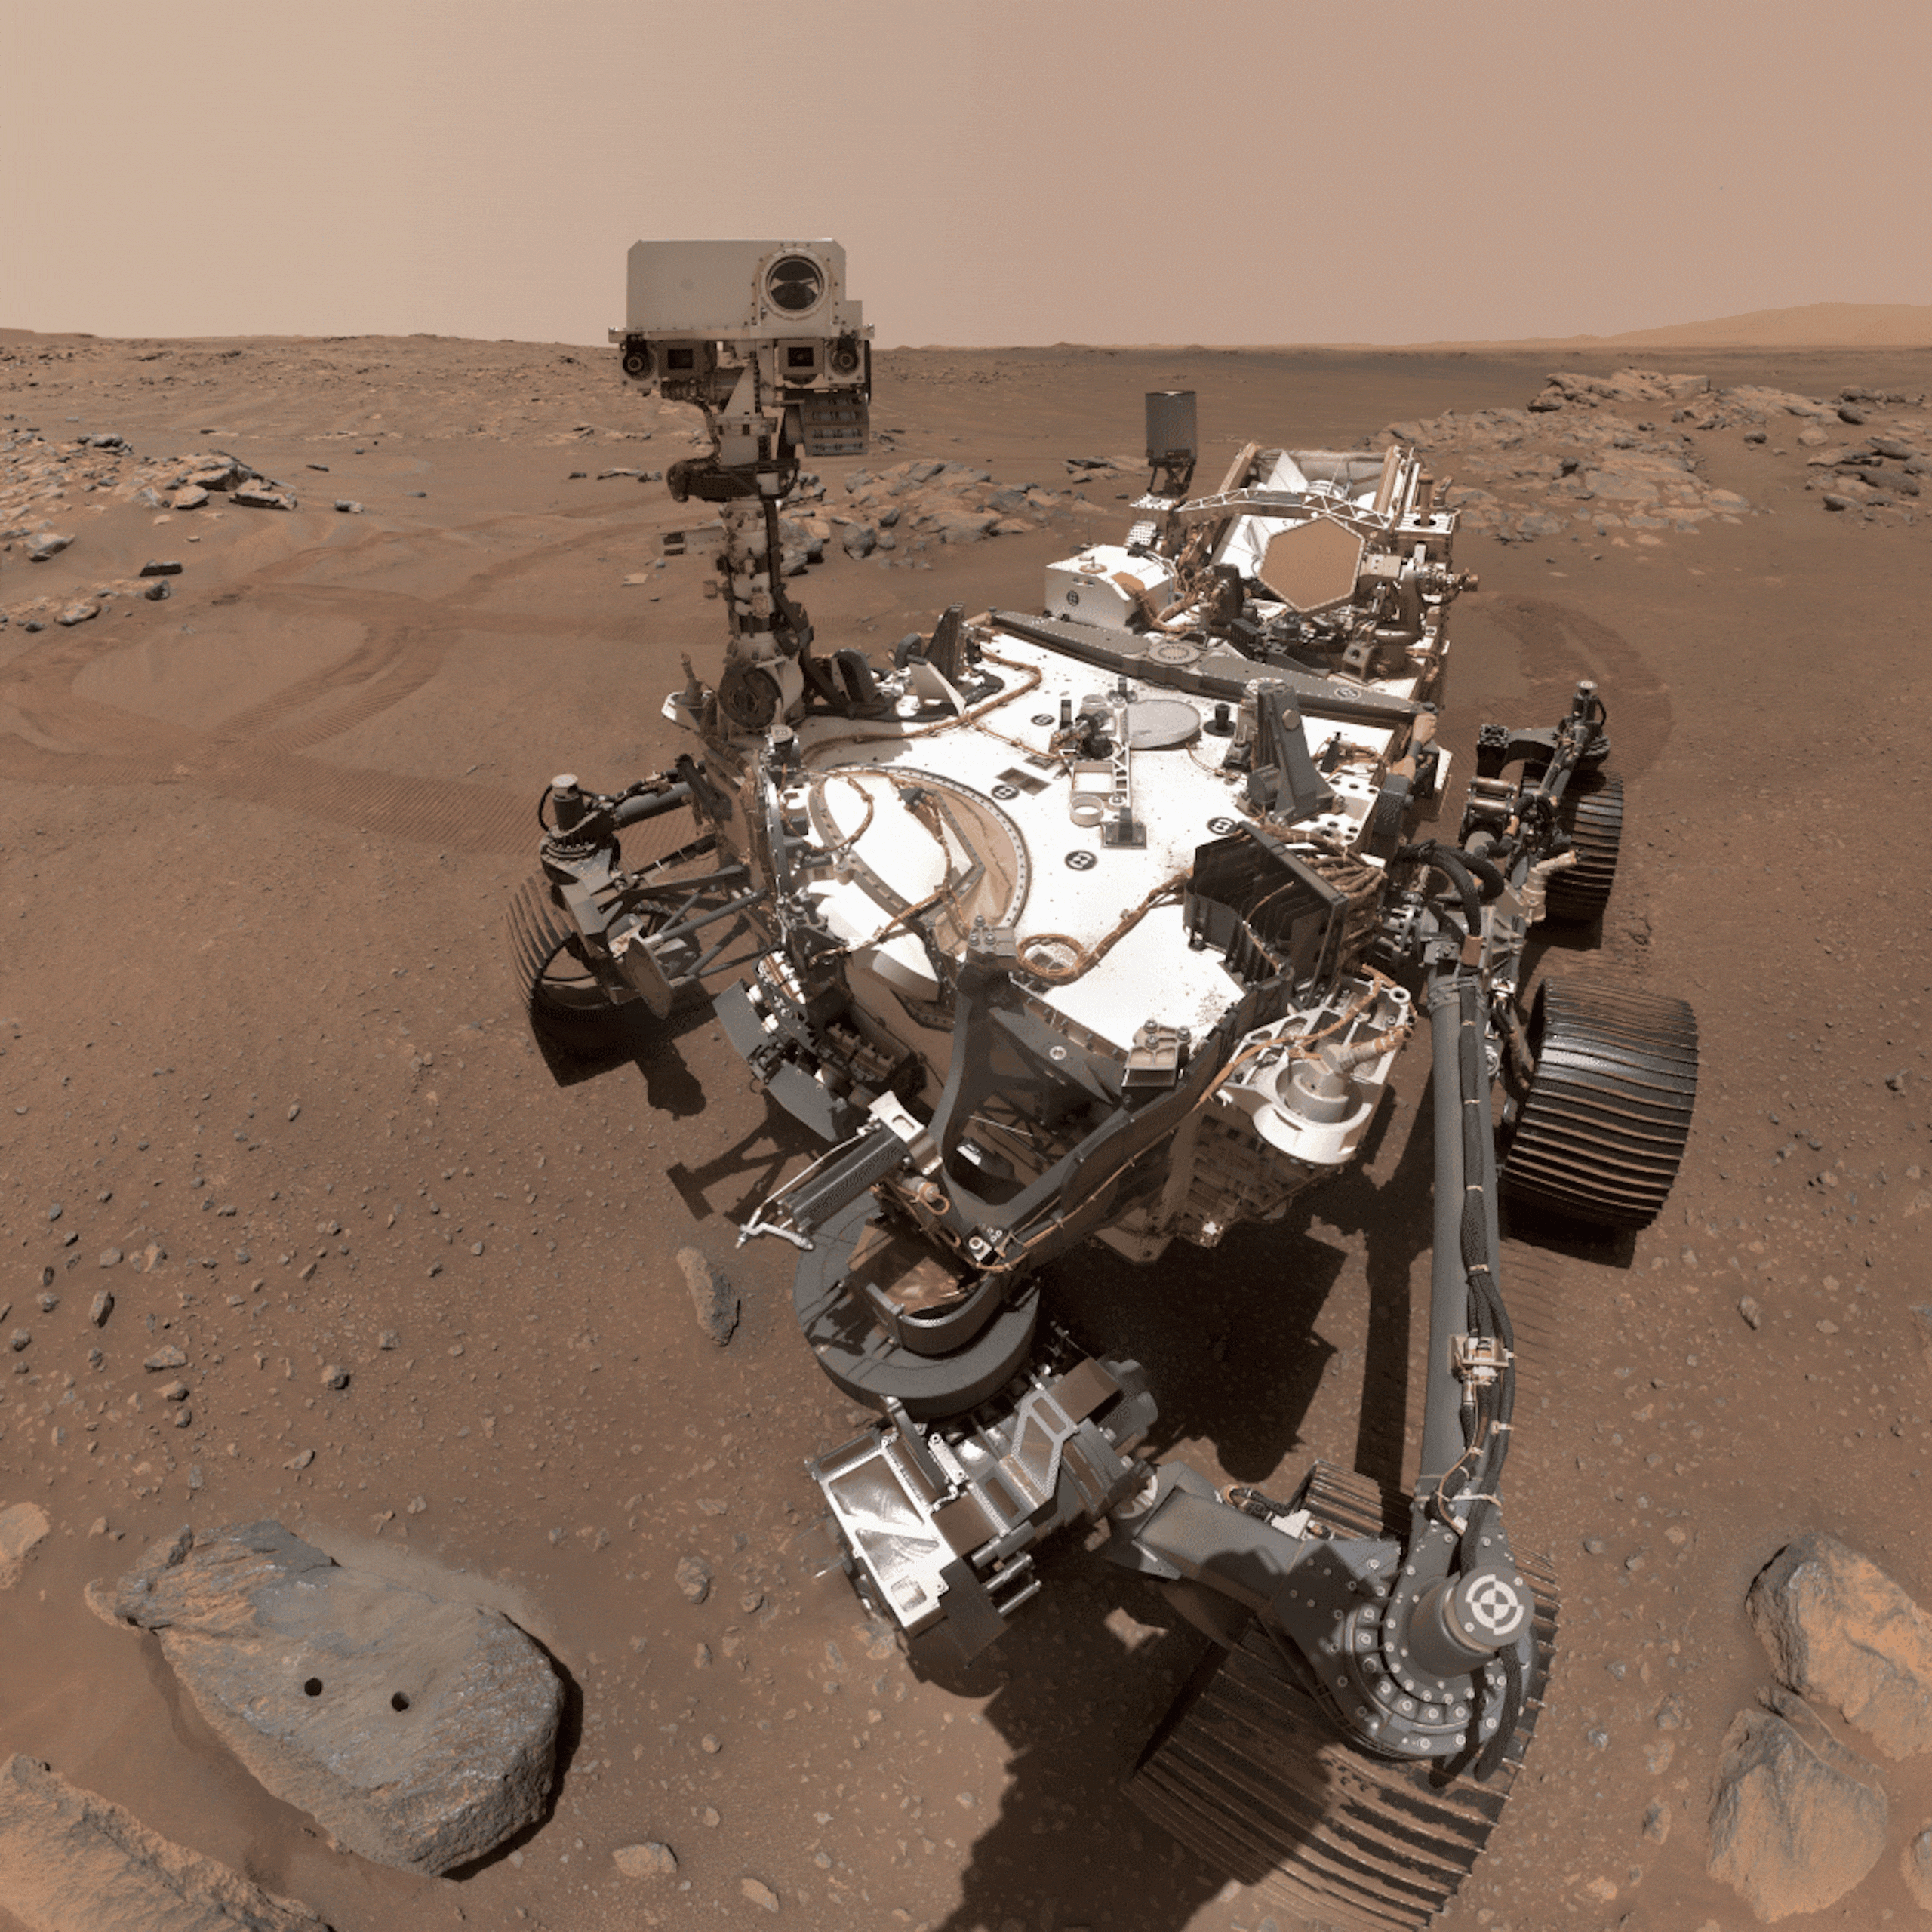 Perseverance rover taking a selfie on Mars.